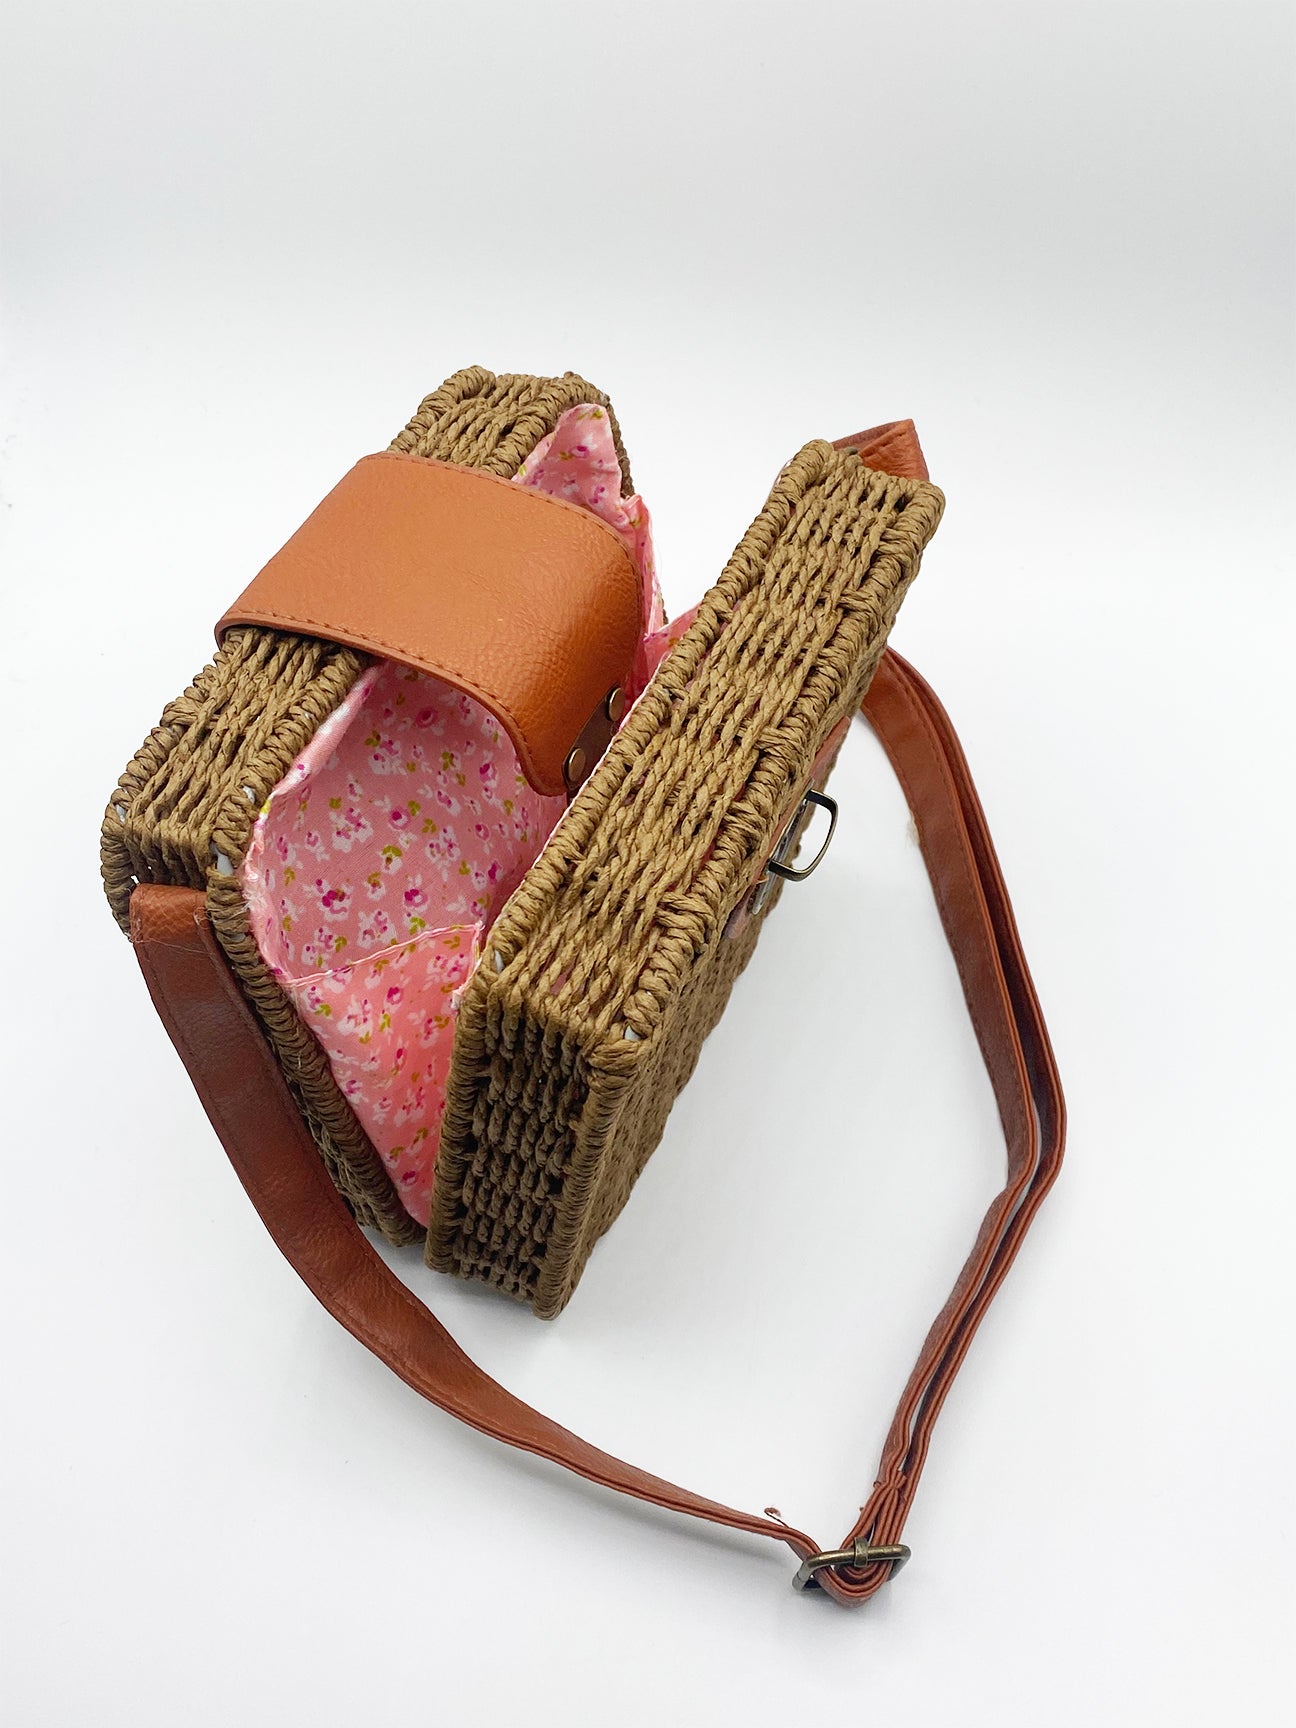 Brown Woven Straw Cross Body Bag with Leather Clasp and Handle